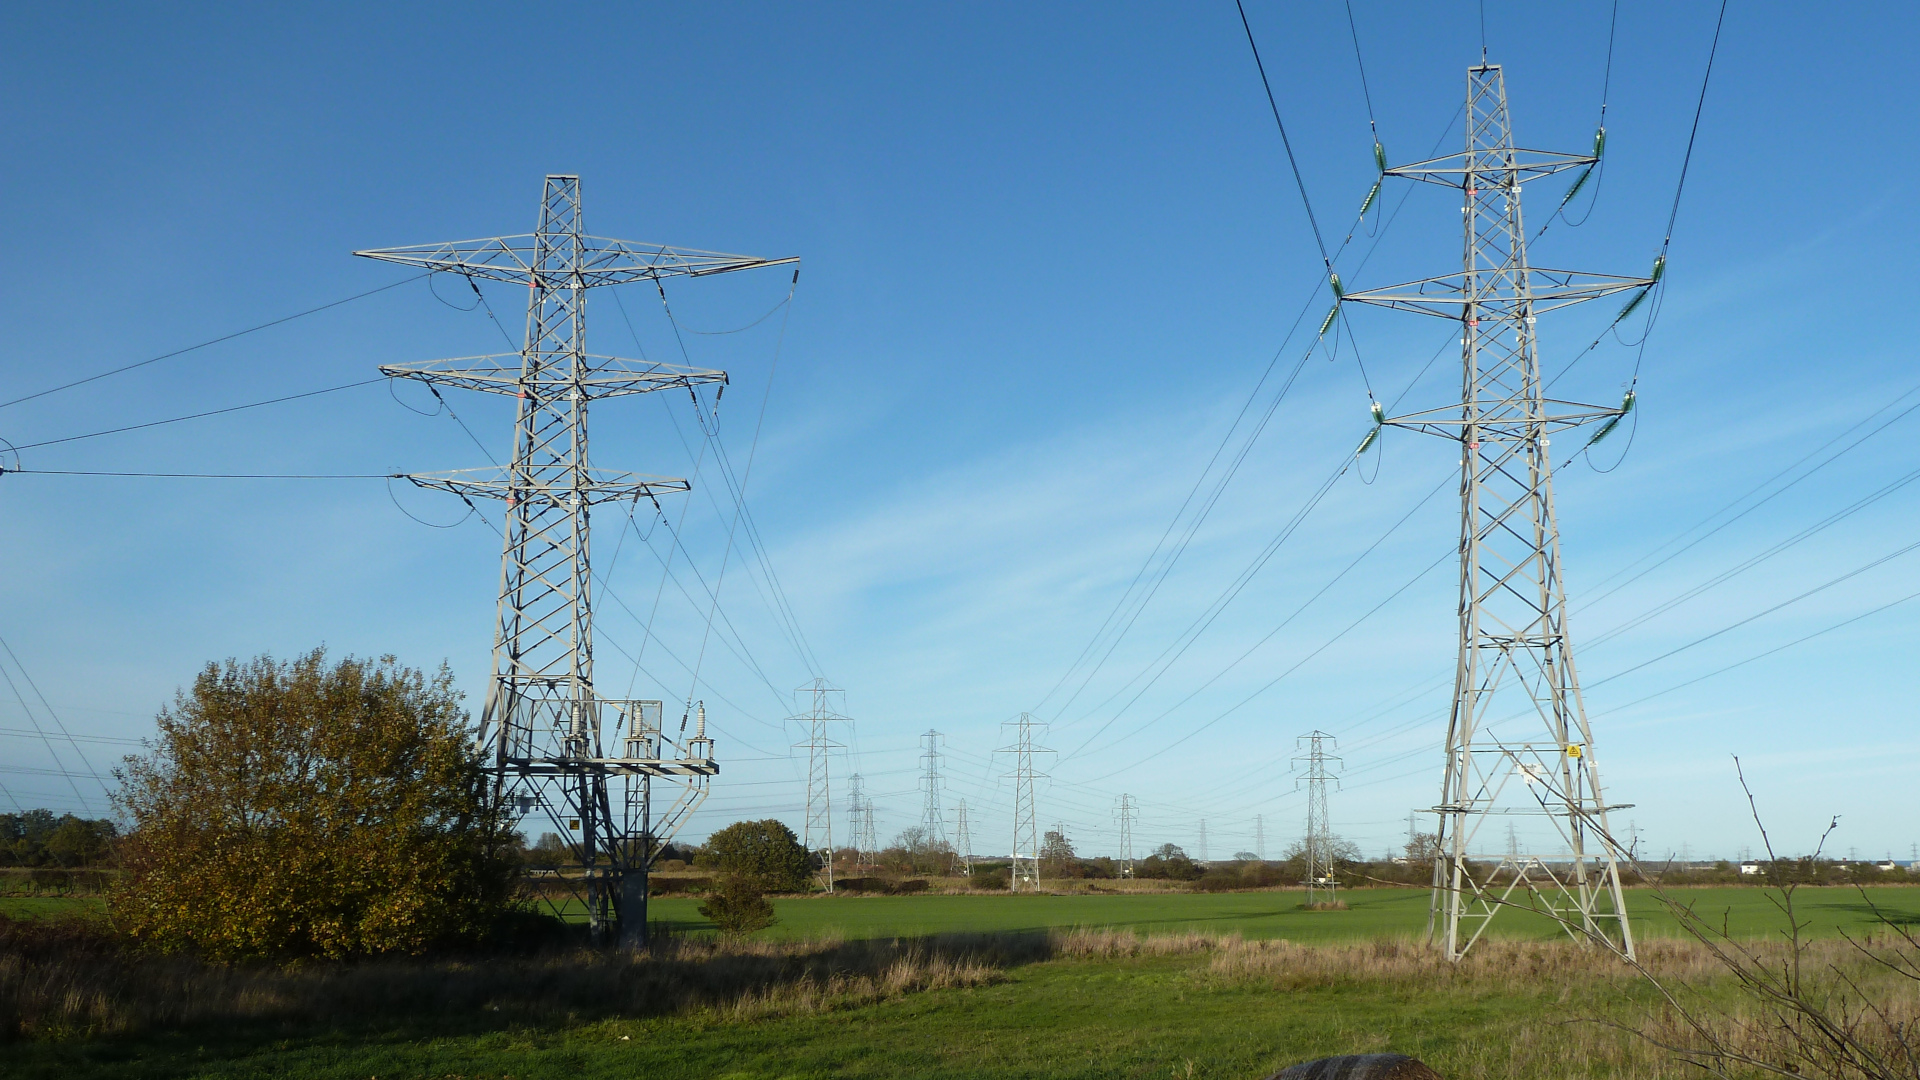 two power grid in front of the picture and other power grids behind